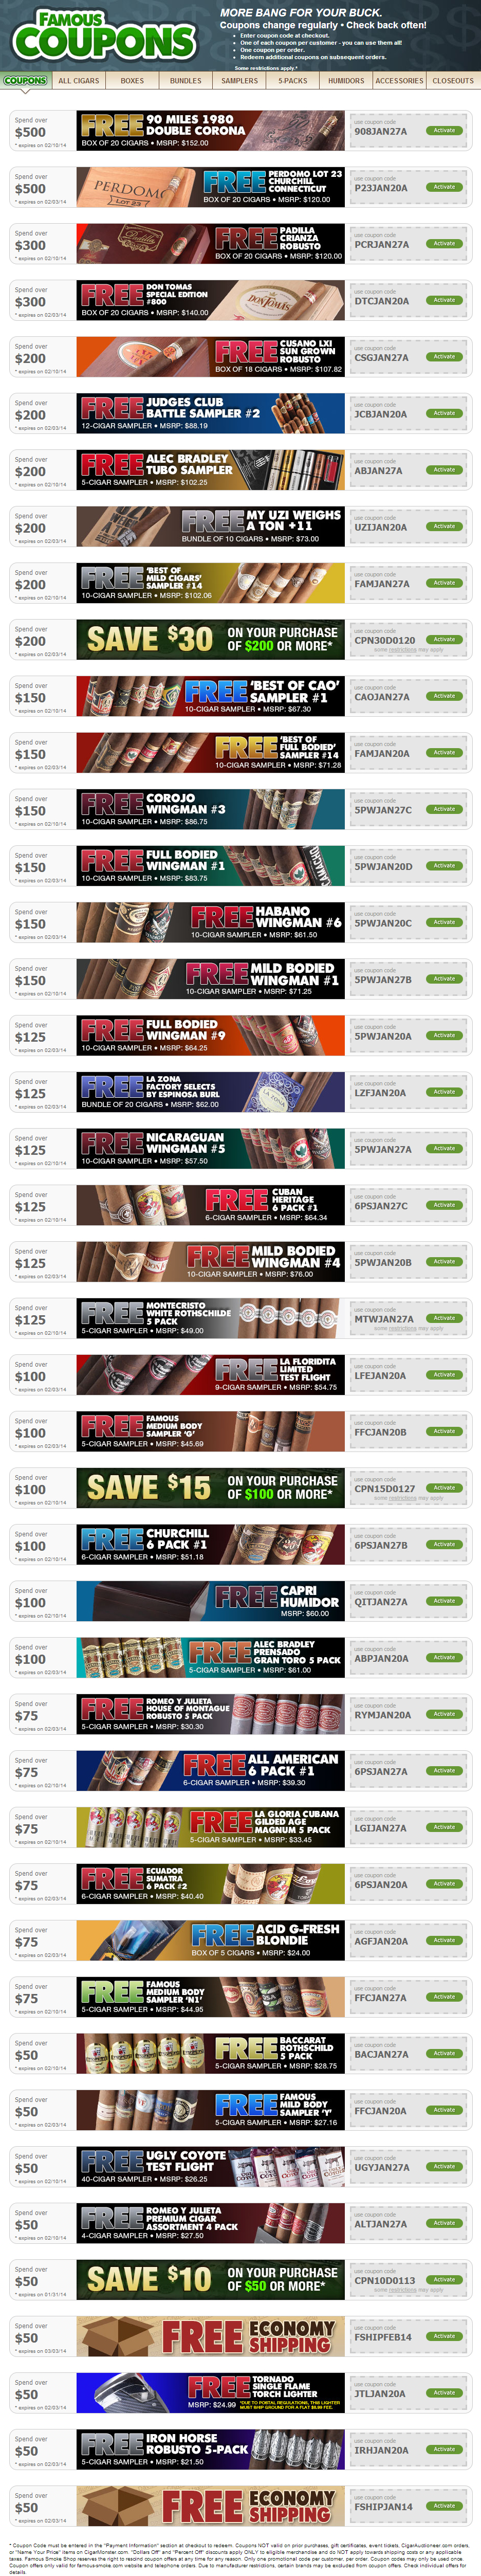 Get Freebies on Your Next Cigar Monster Order